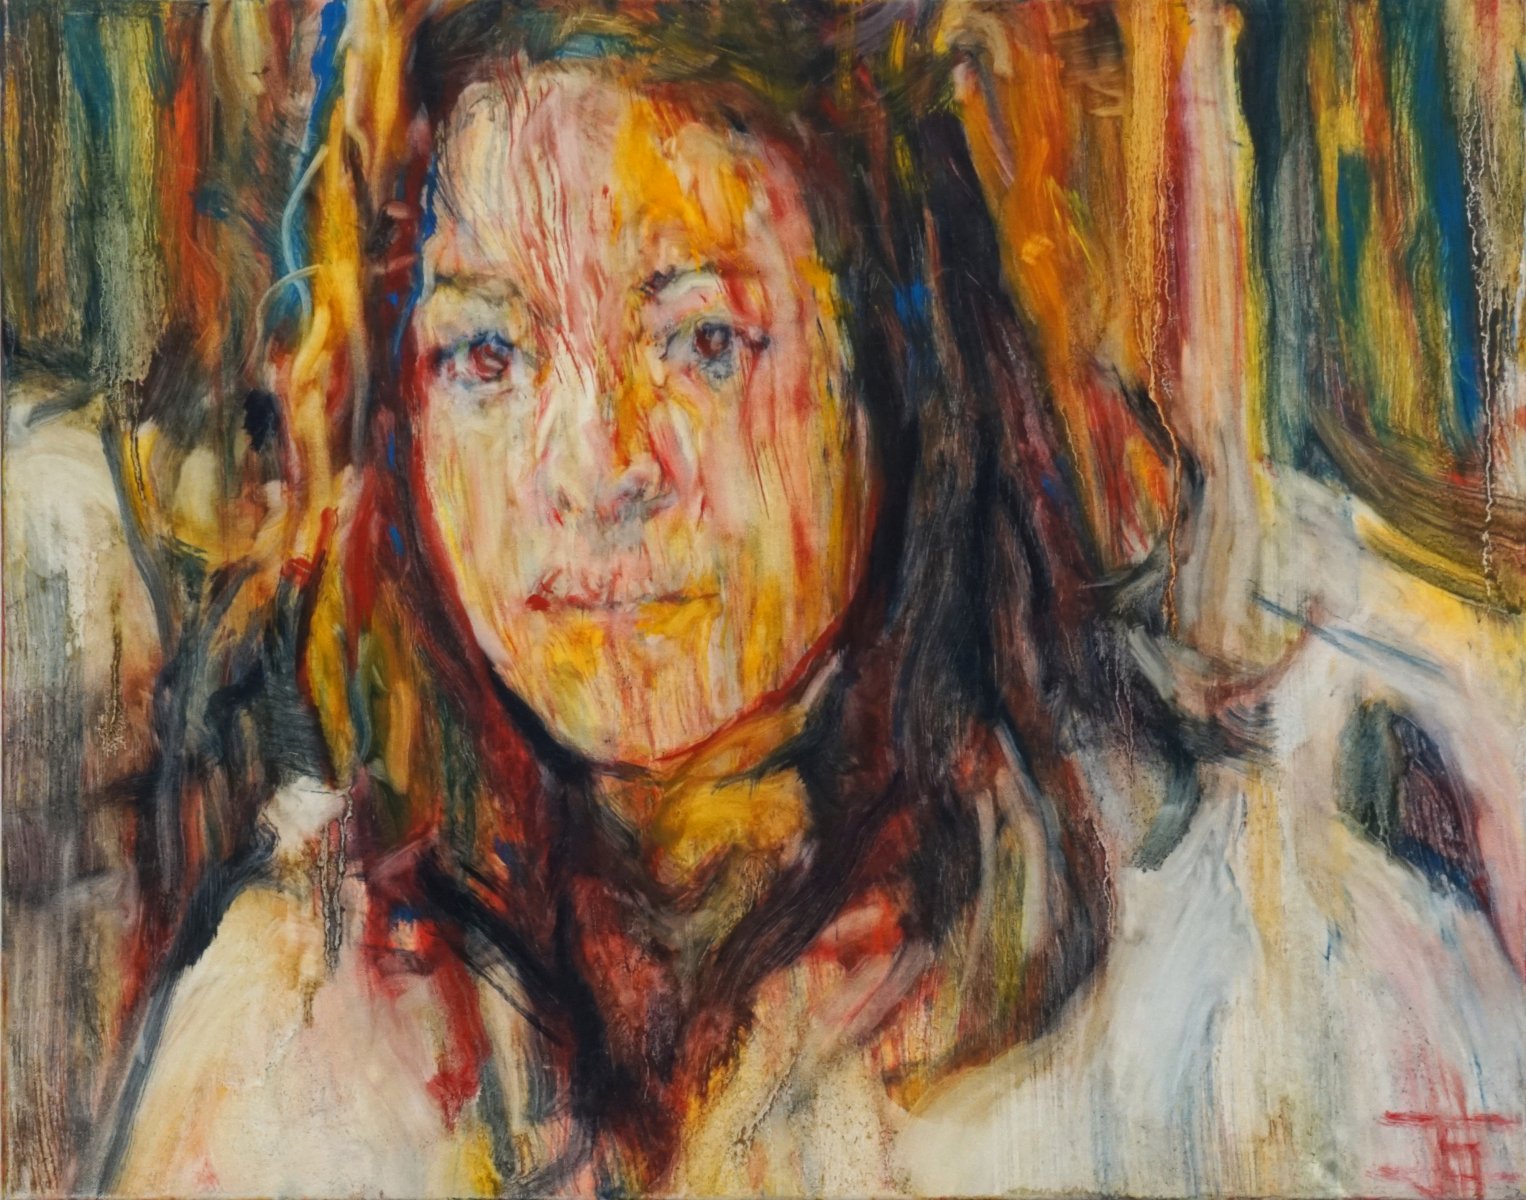 Oil painting by Jeremy Eliosoff, Girl In White Coat, 2011, 28" x 22"